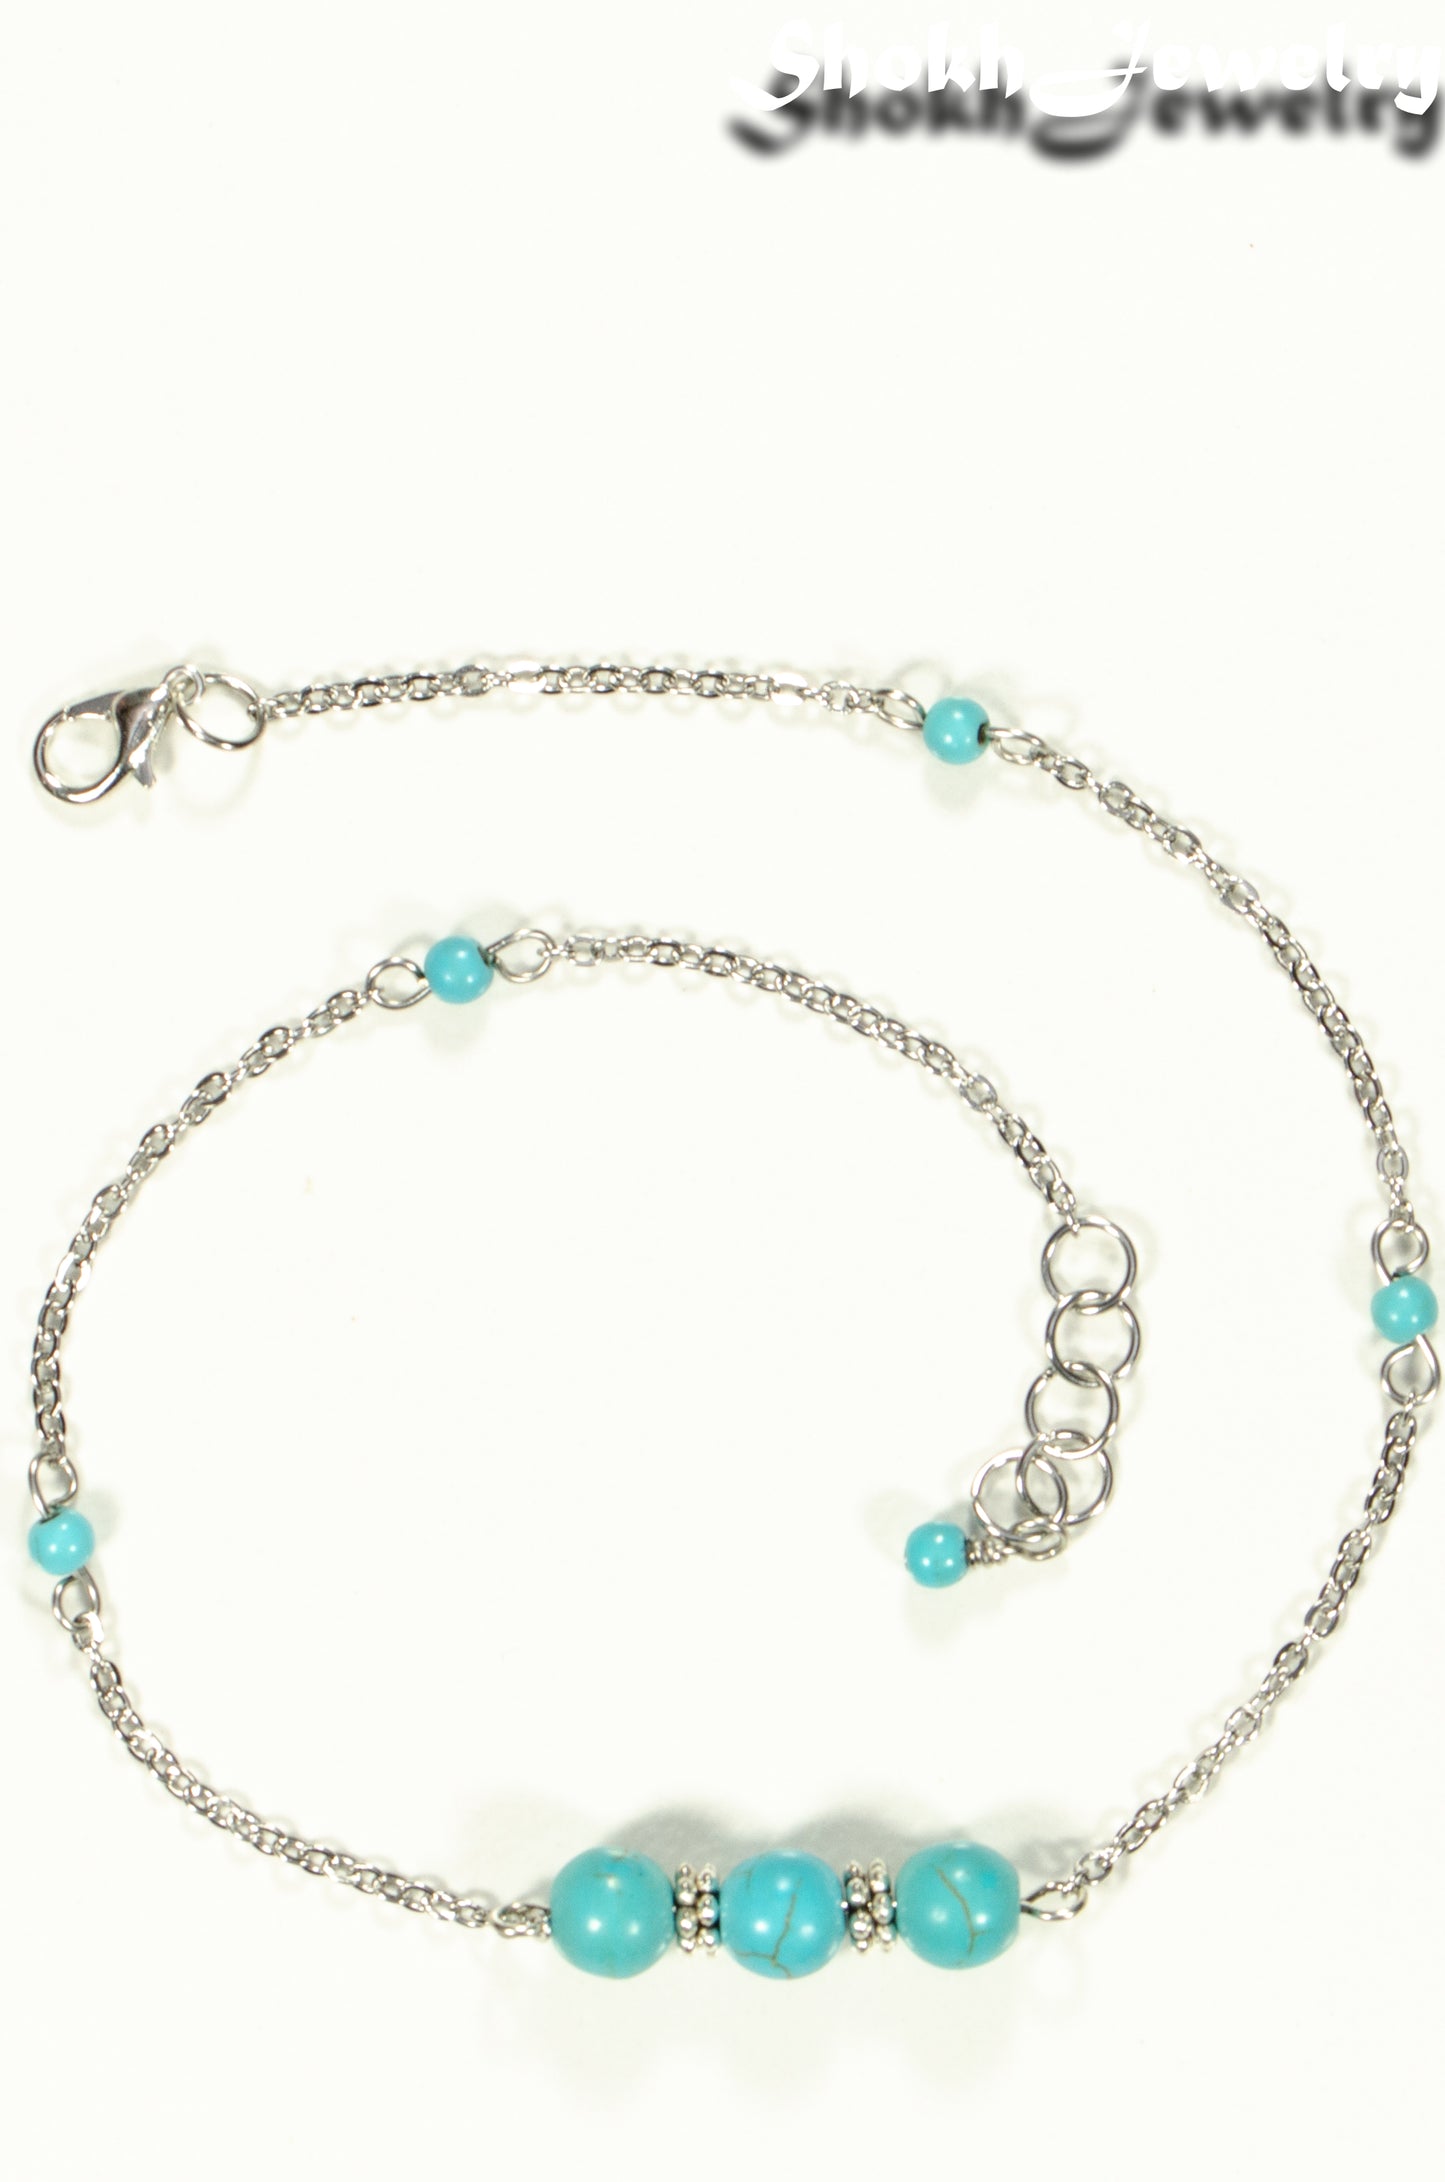 Top view of Natural Turquoise Howlite and Chain Choker Necklace.